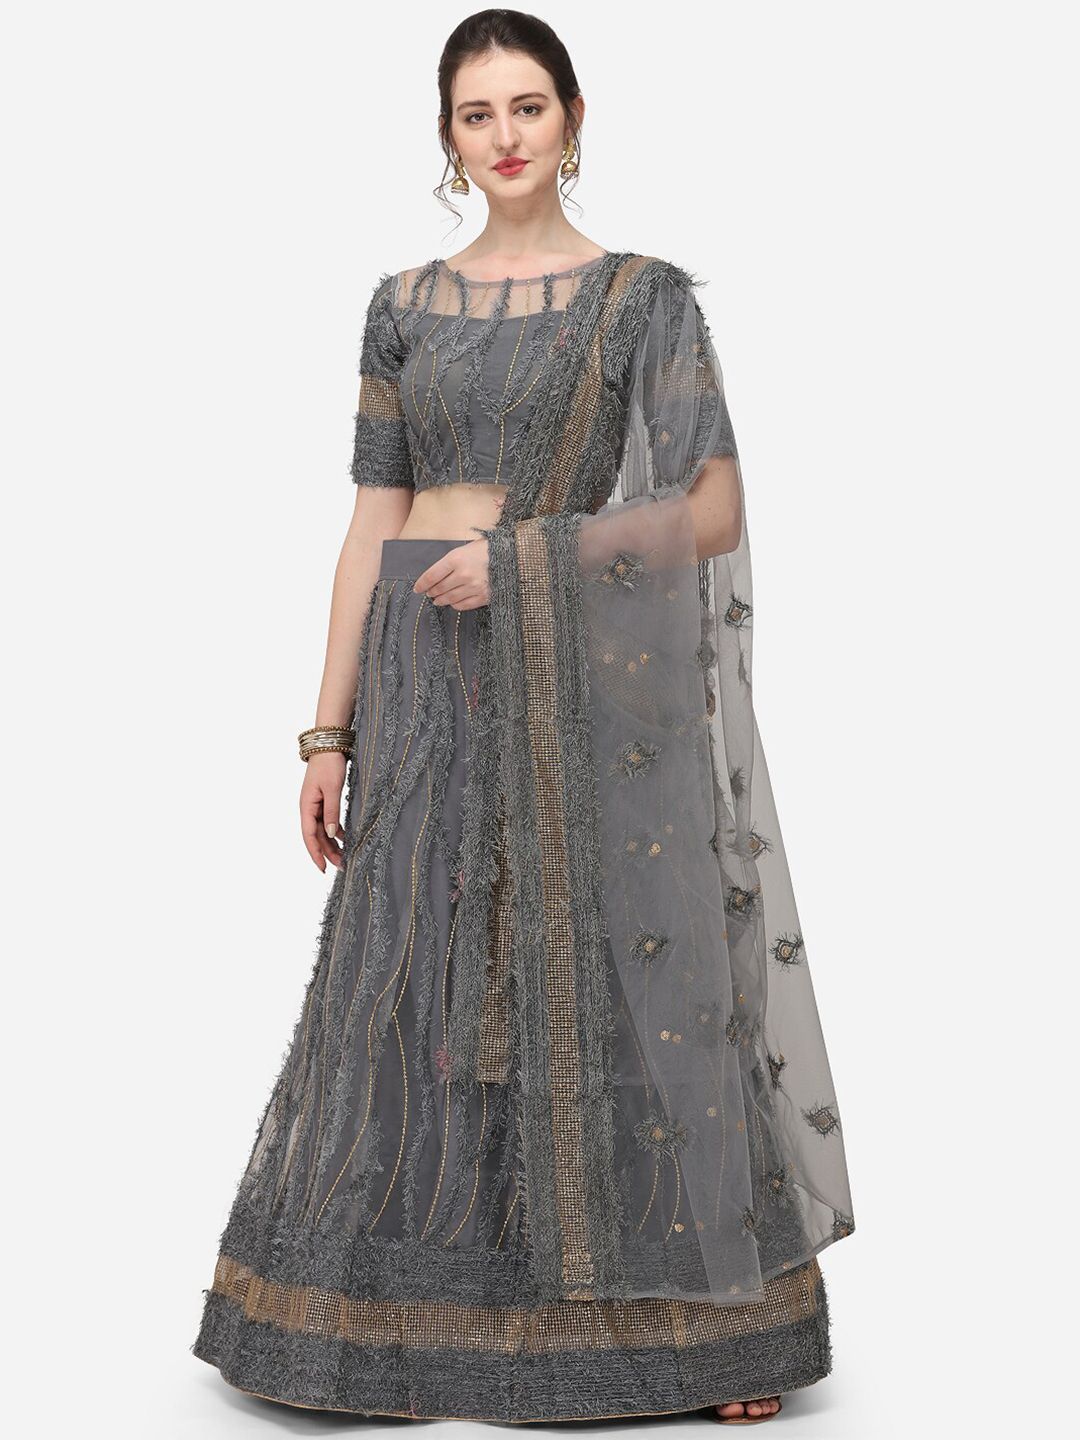 JATRIQQ Grey Net Embroidered Semi Stitched Lehenga & Unstitched Blouse with Dupatta Price in India